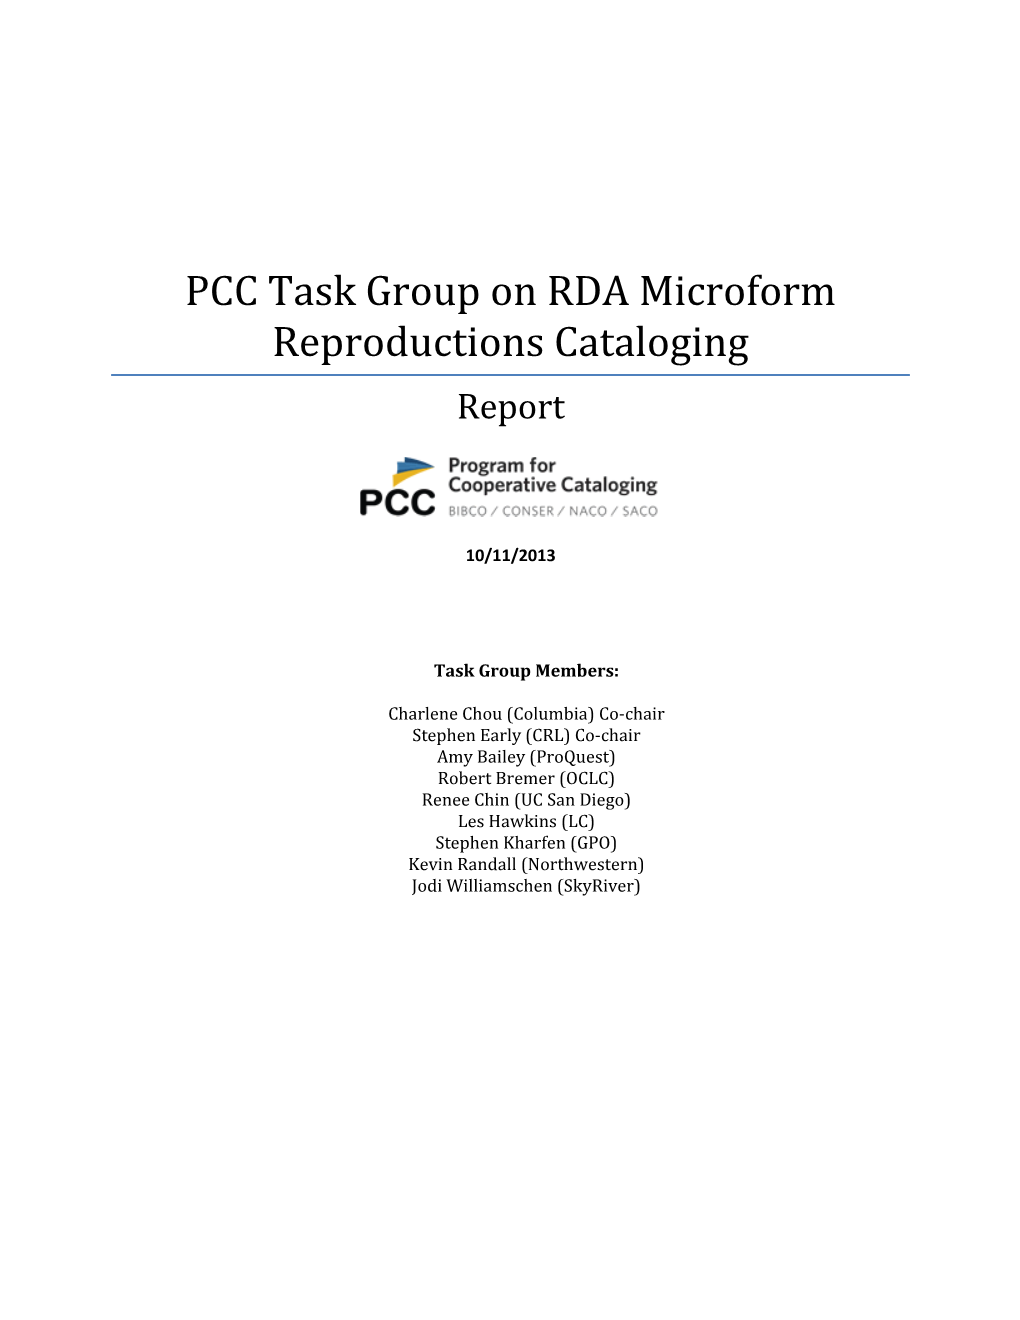 PCC Task Group on RDA Microform Reproductions Cataloging